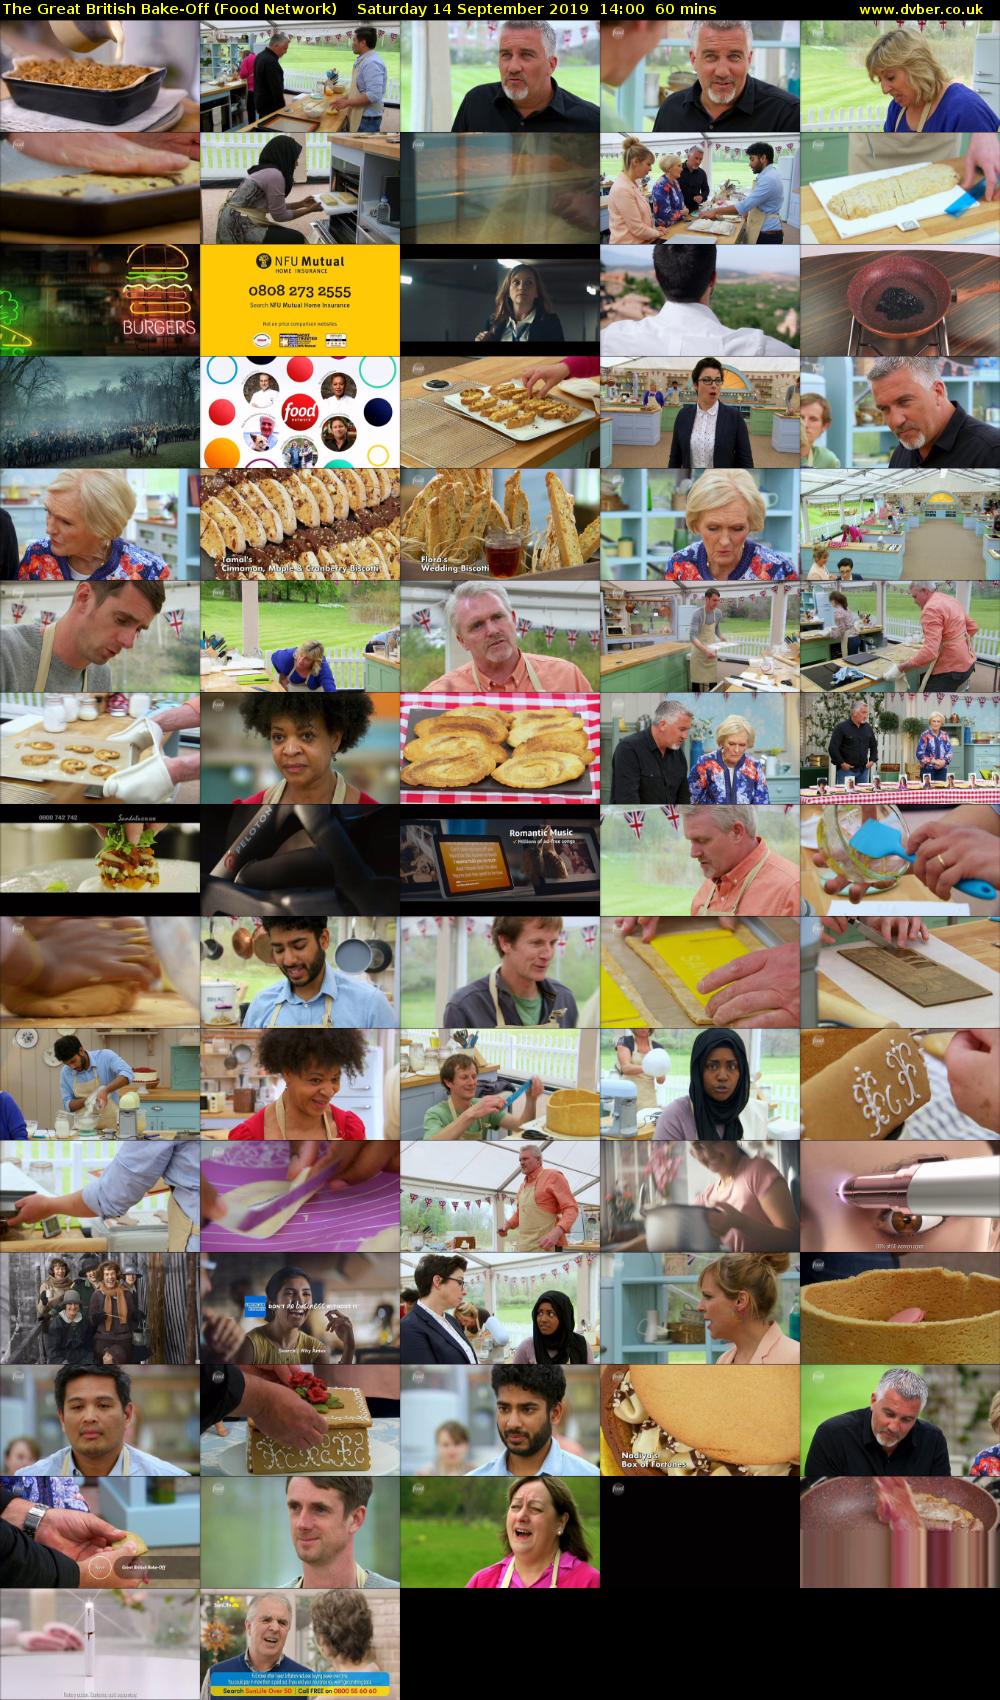 The Great British Bake-Off (Food Network) Saturday 14 September 2019 14:00 - 15:00